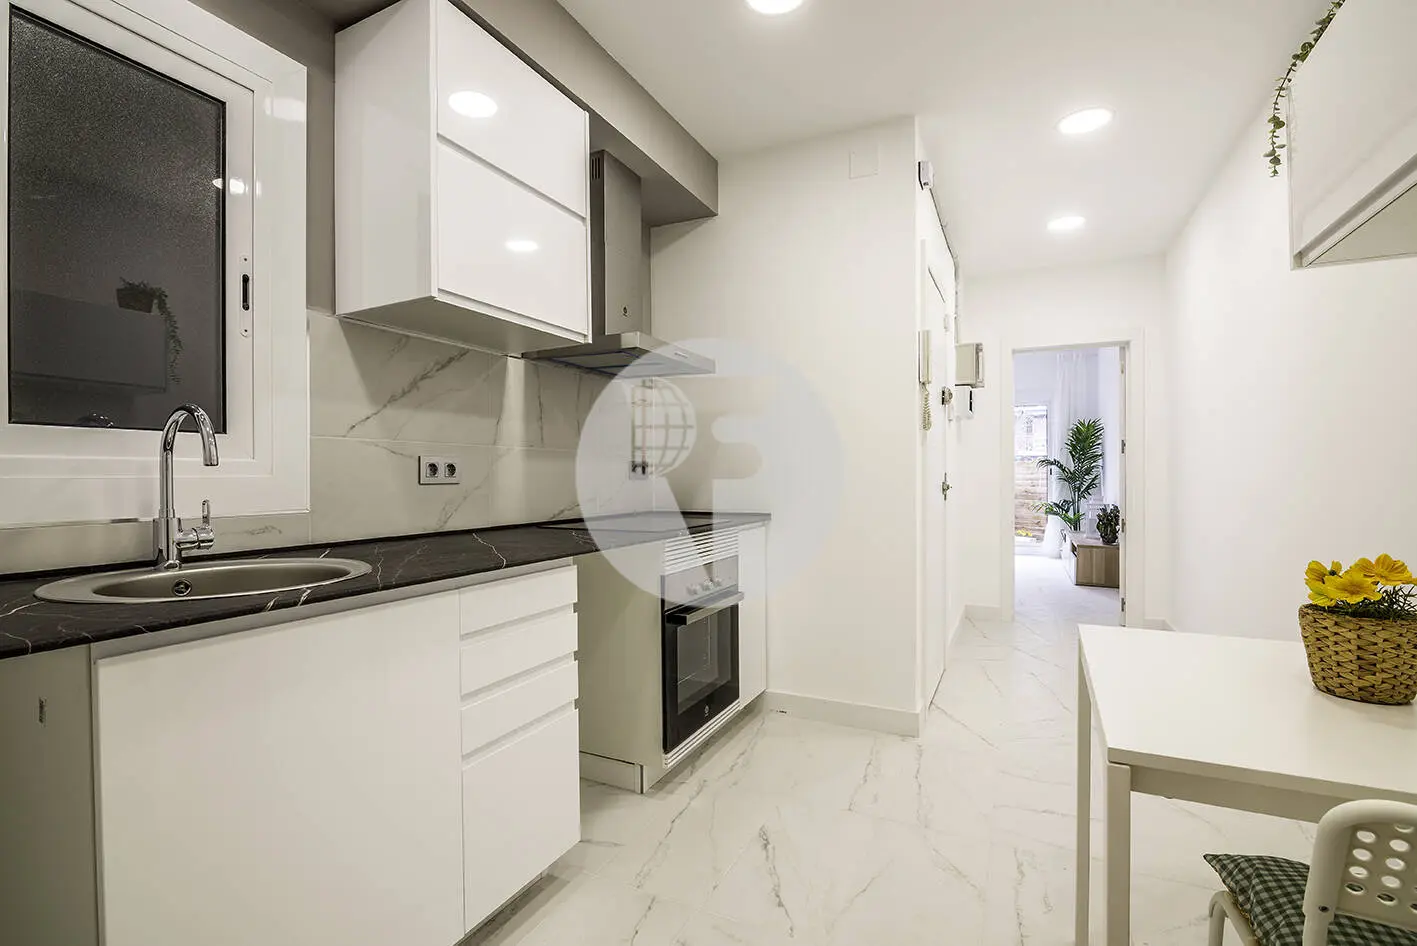 Brand new completely renovated apartment on Aragó street in the heart of El Clot in Barcelona. 17